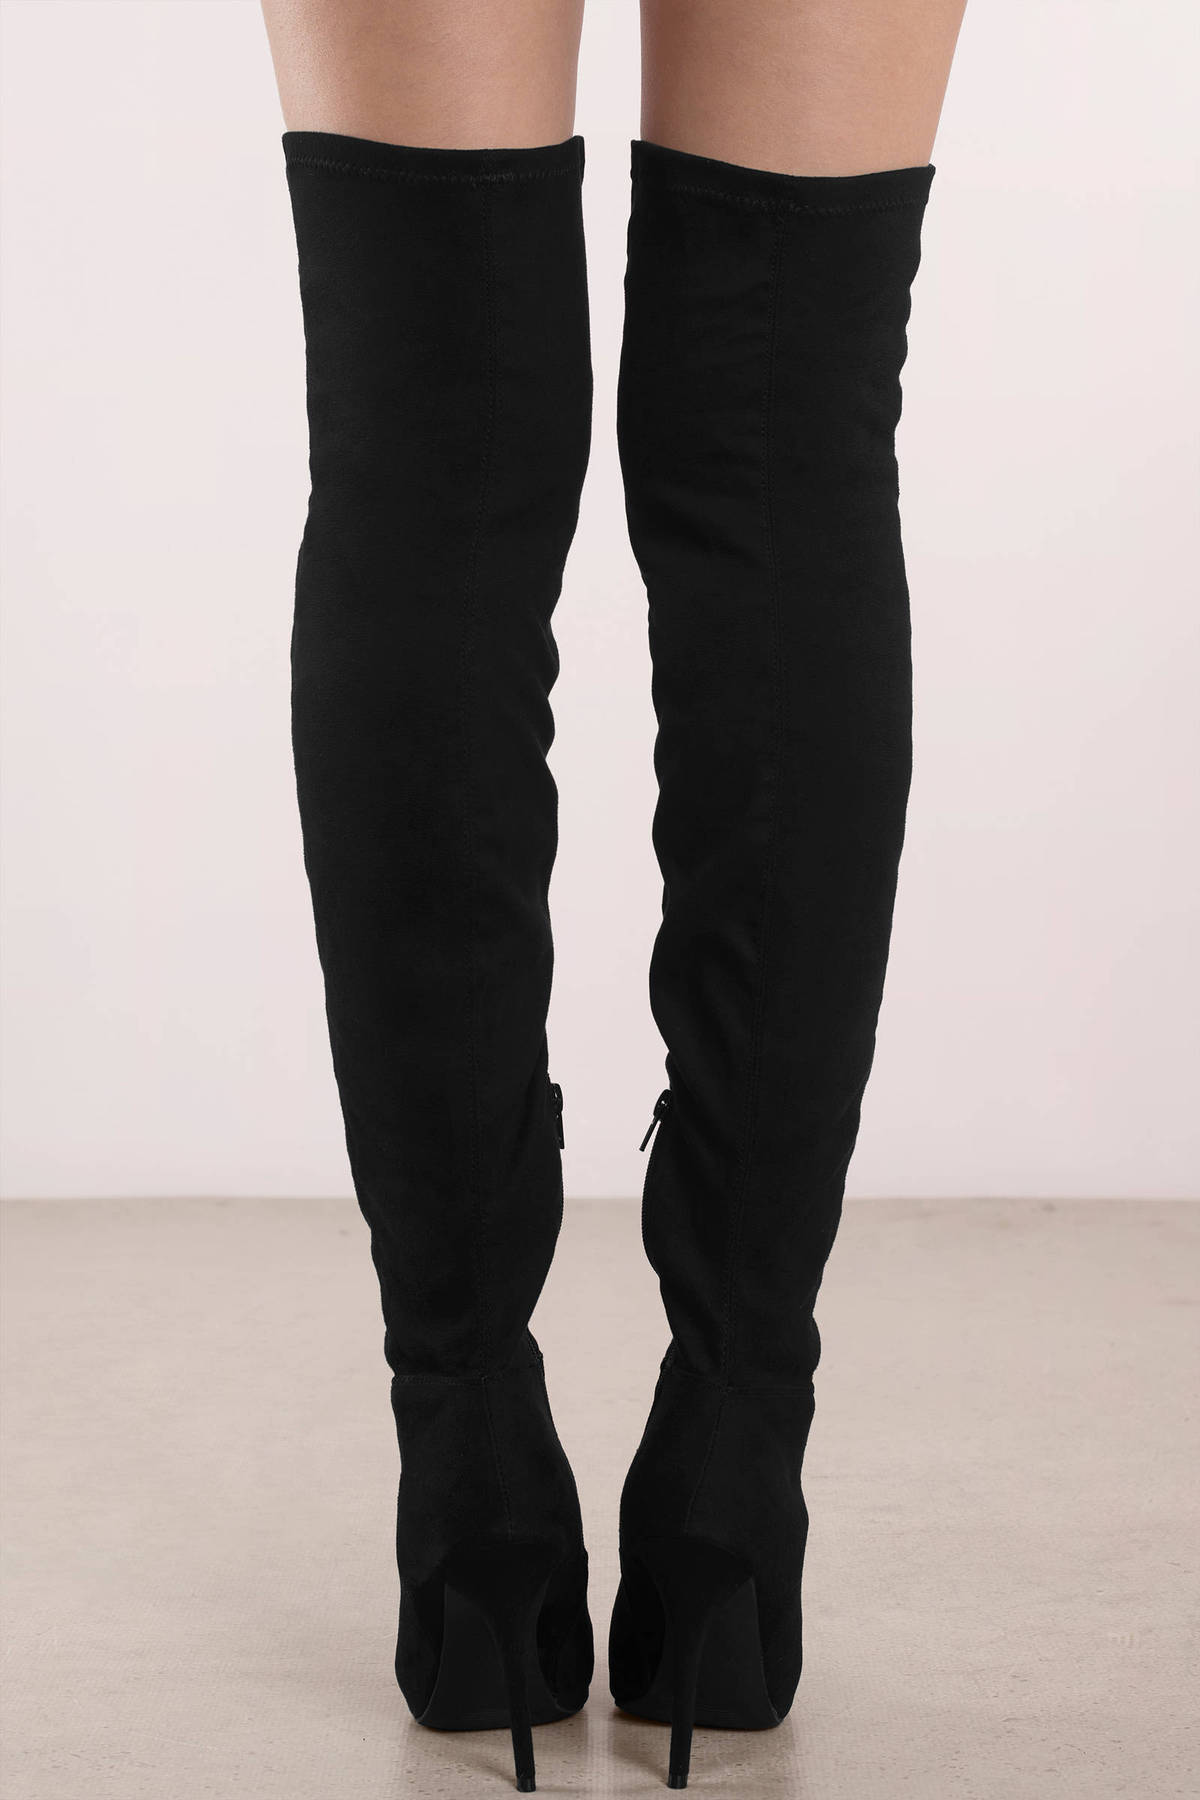 Made For Walking Faux Suede Thigh High Boots in Black - $34 | Tobi US